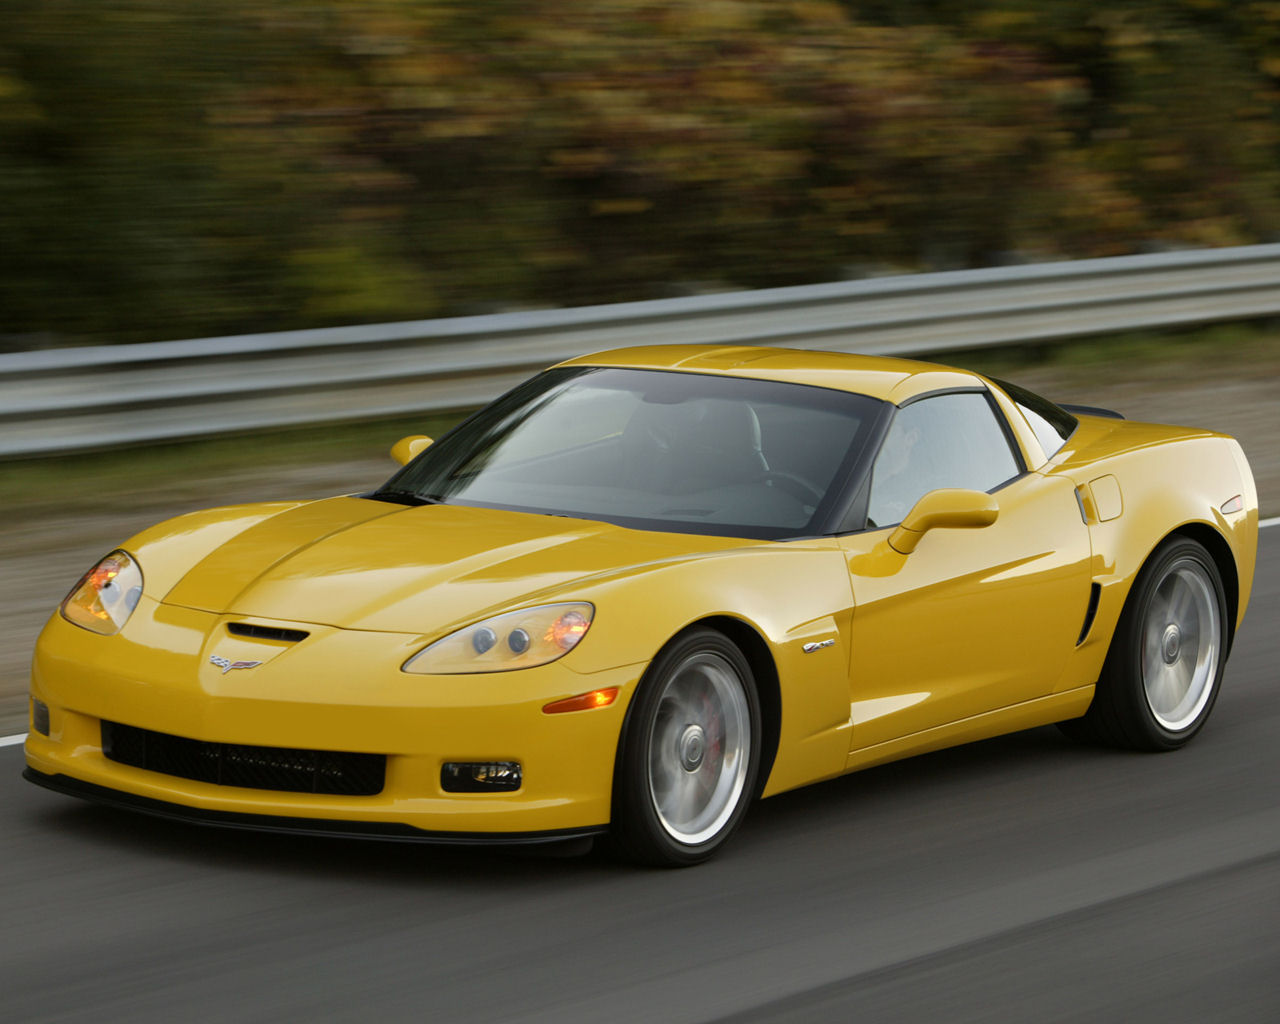 The Chevrolet Corvette Wallpaper Below And Choose Set As Background